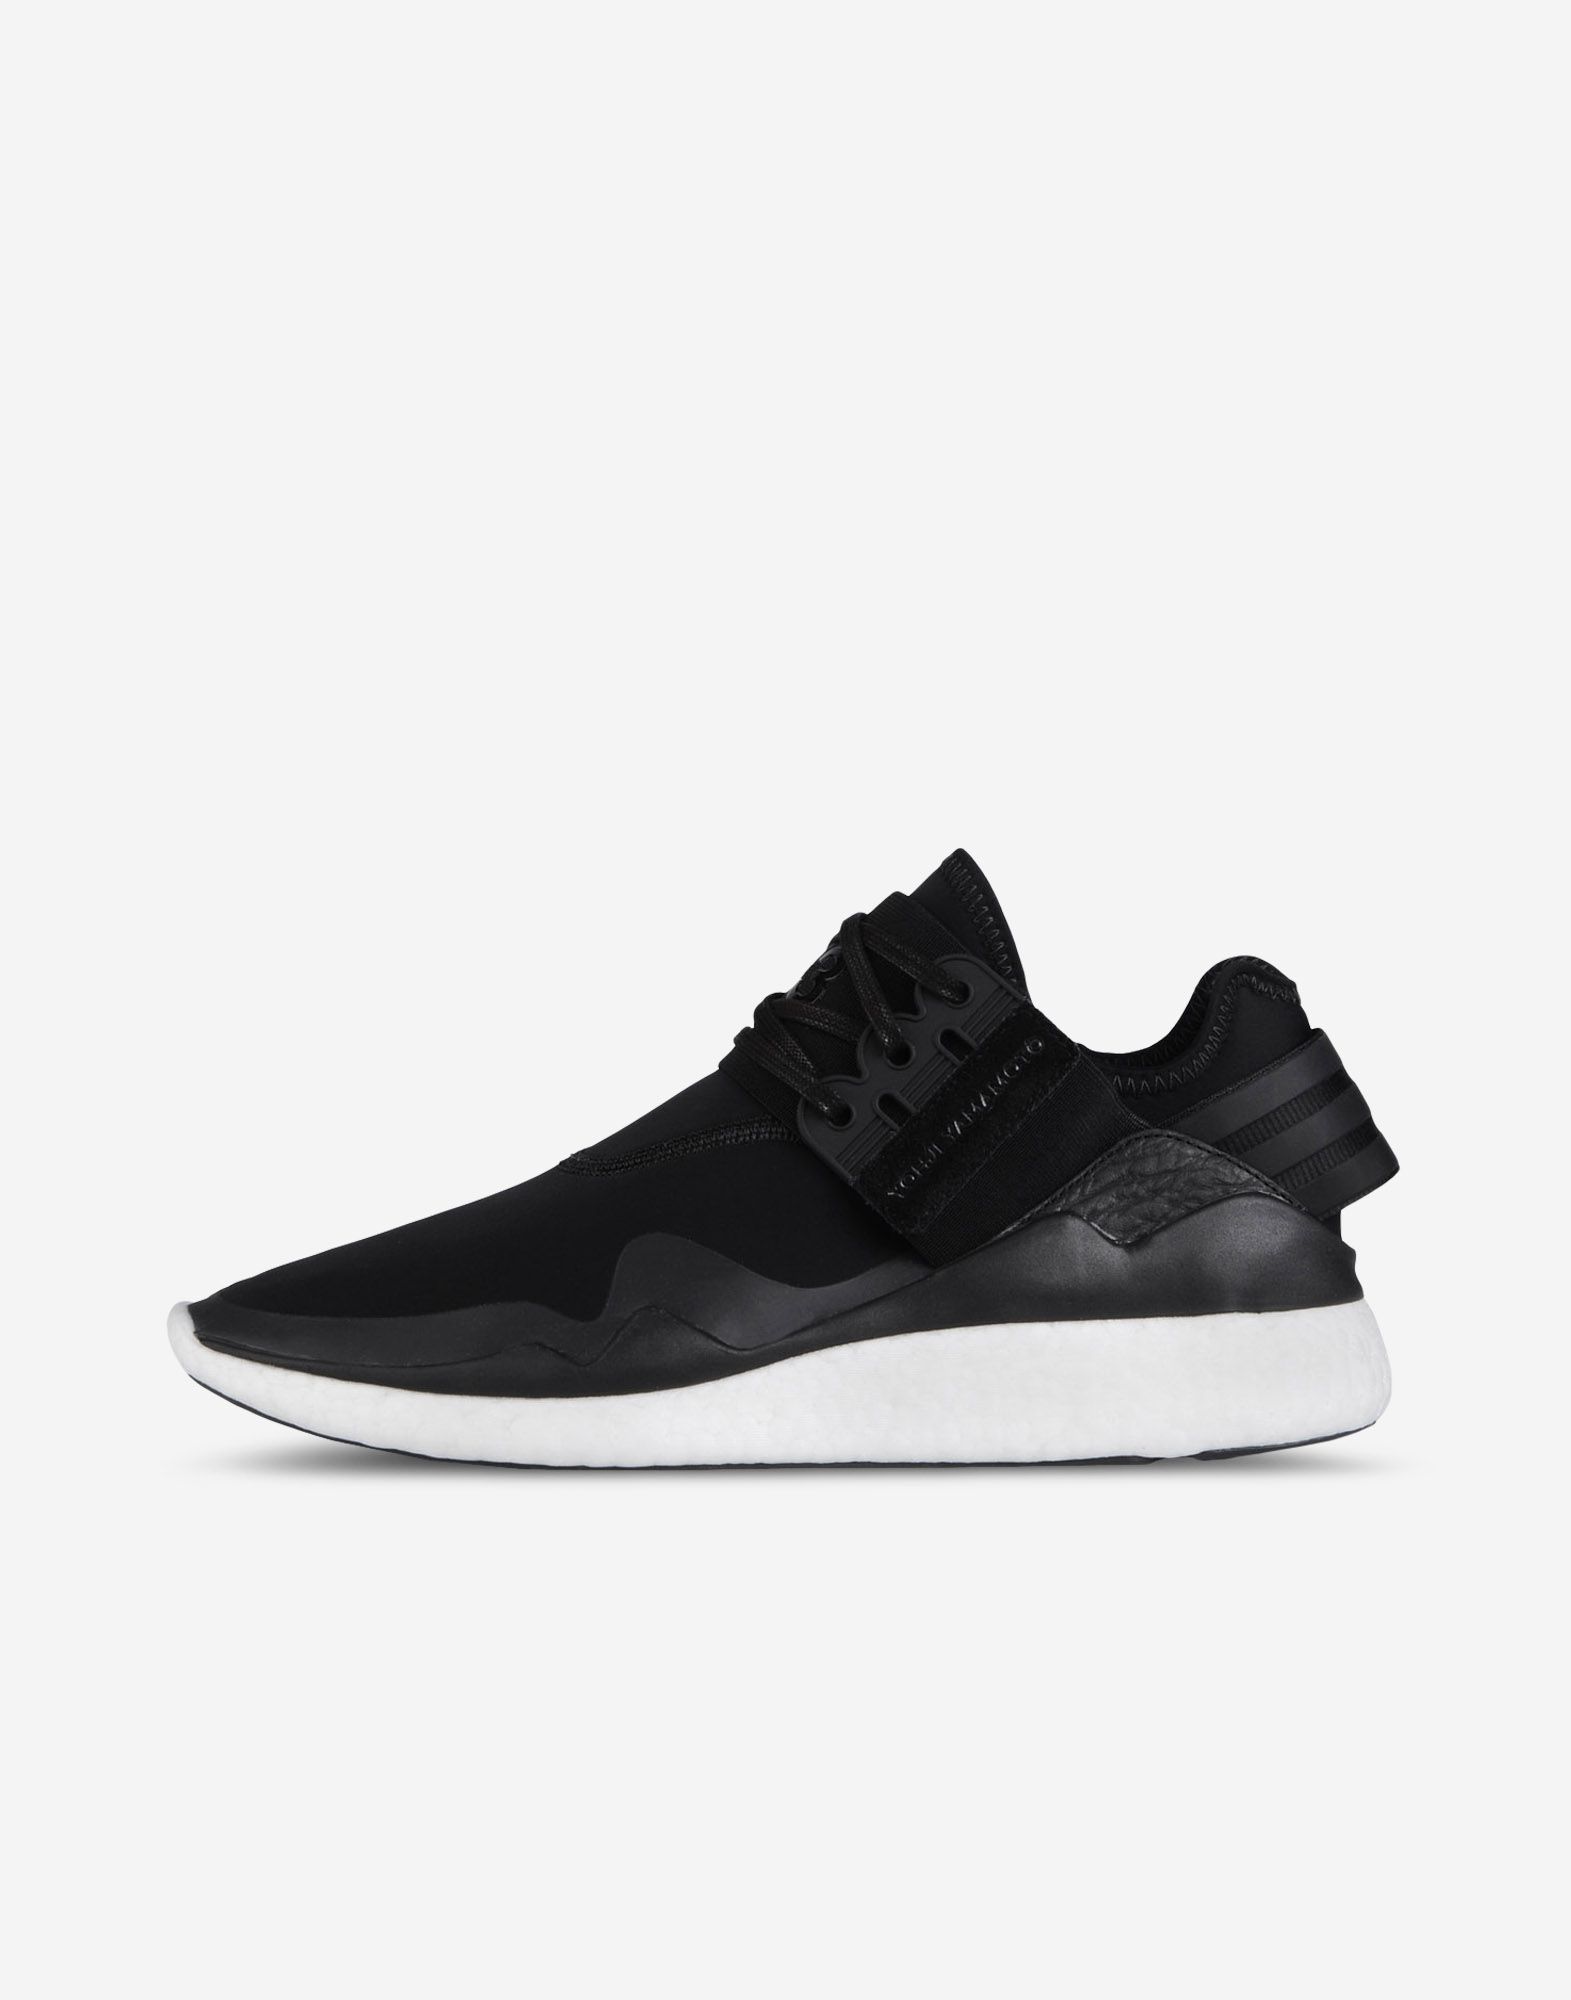 y3 boost shoes